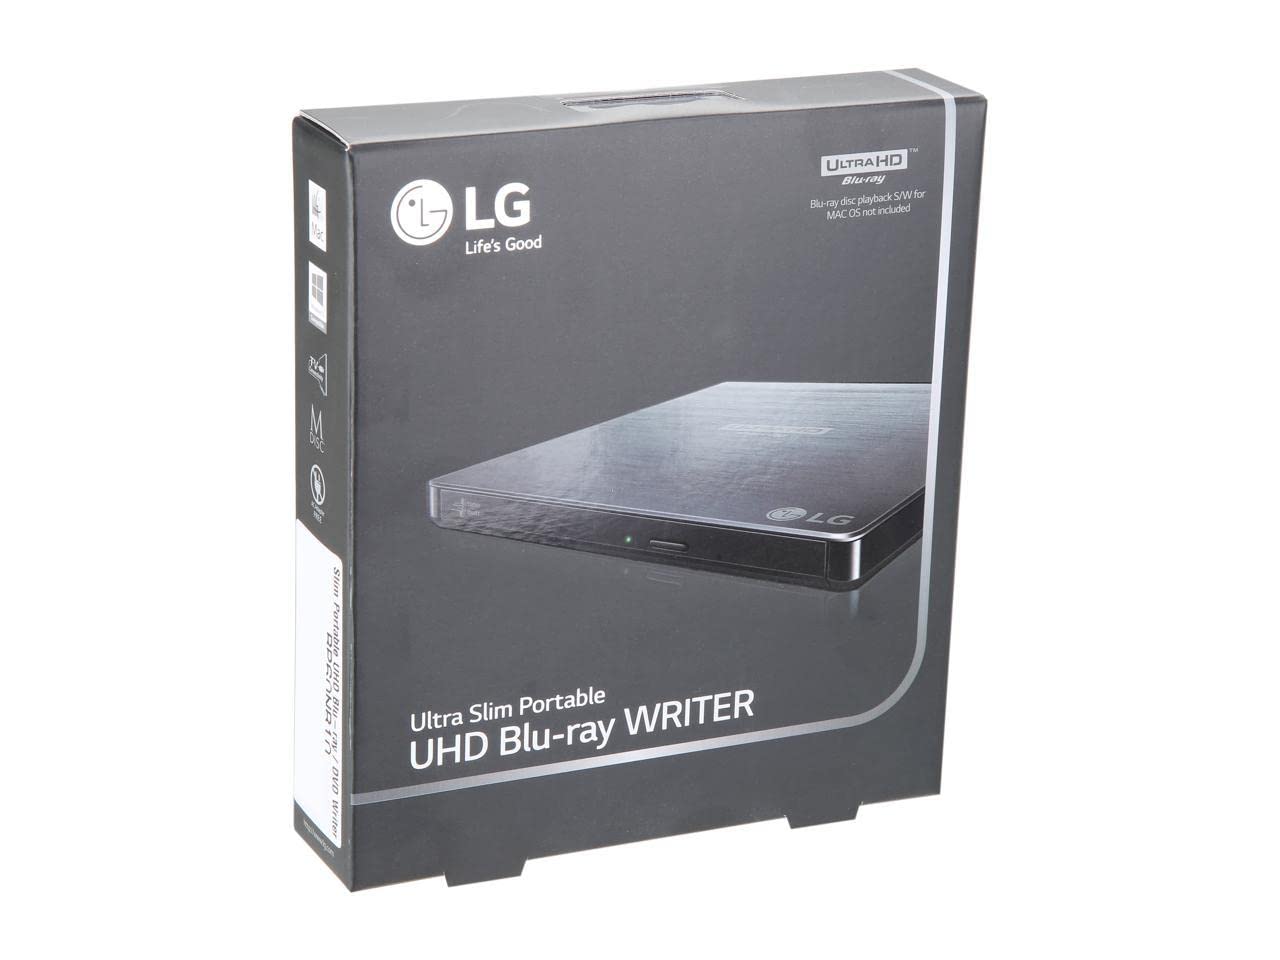 LG Electronics BP60NB10 Ultra Slim Portable UHD 4K/Blu-ray/DVD+/-RW Drive, USB 3.0 Compatible, PC Windows, Linux, Mac OS, with M-DISC support, Noise Reduction, Black